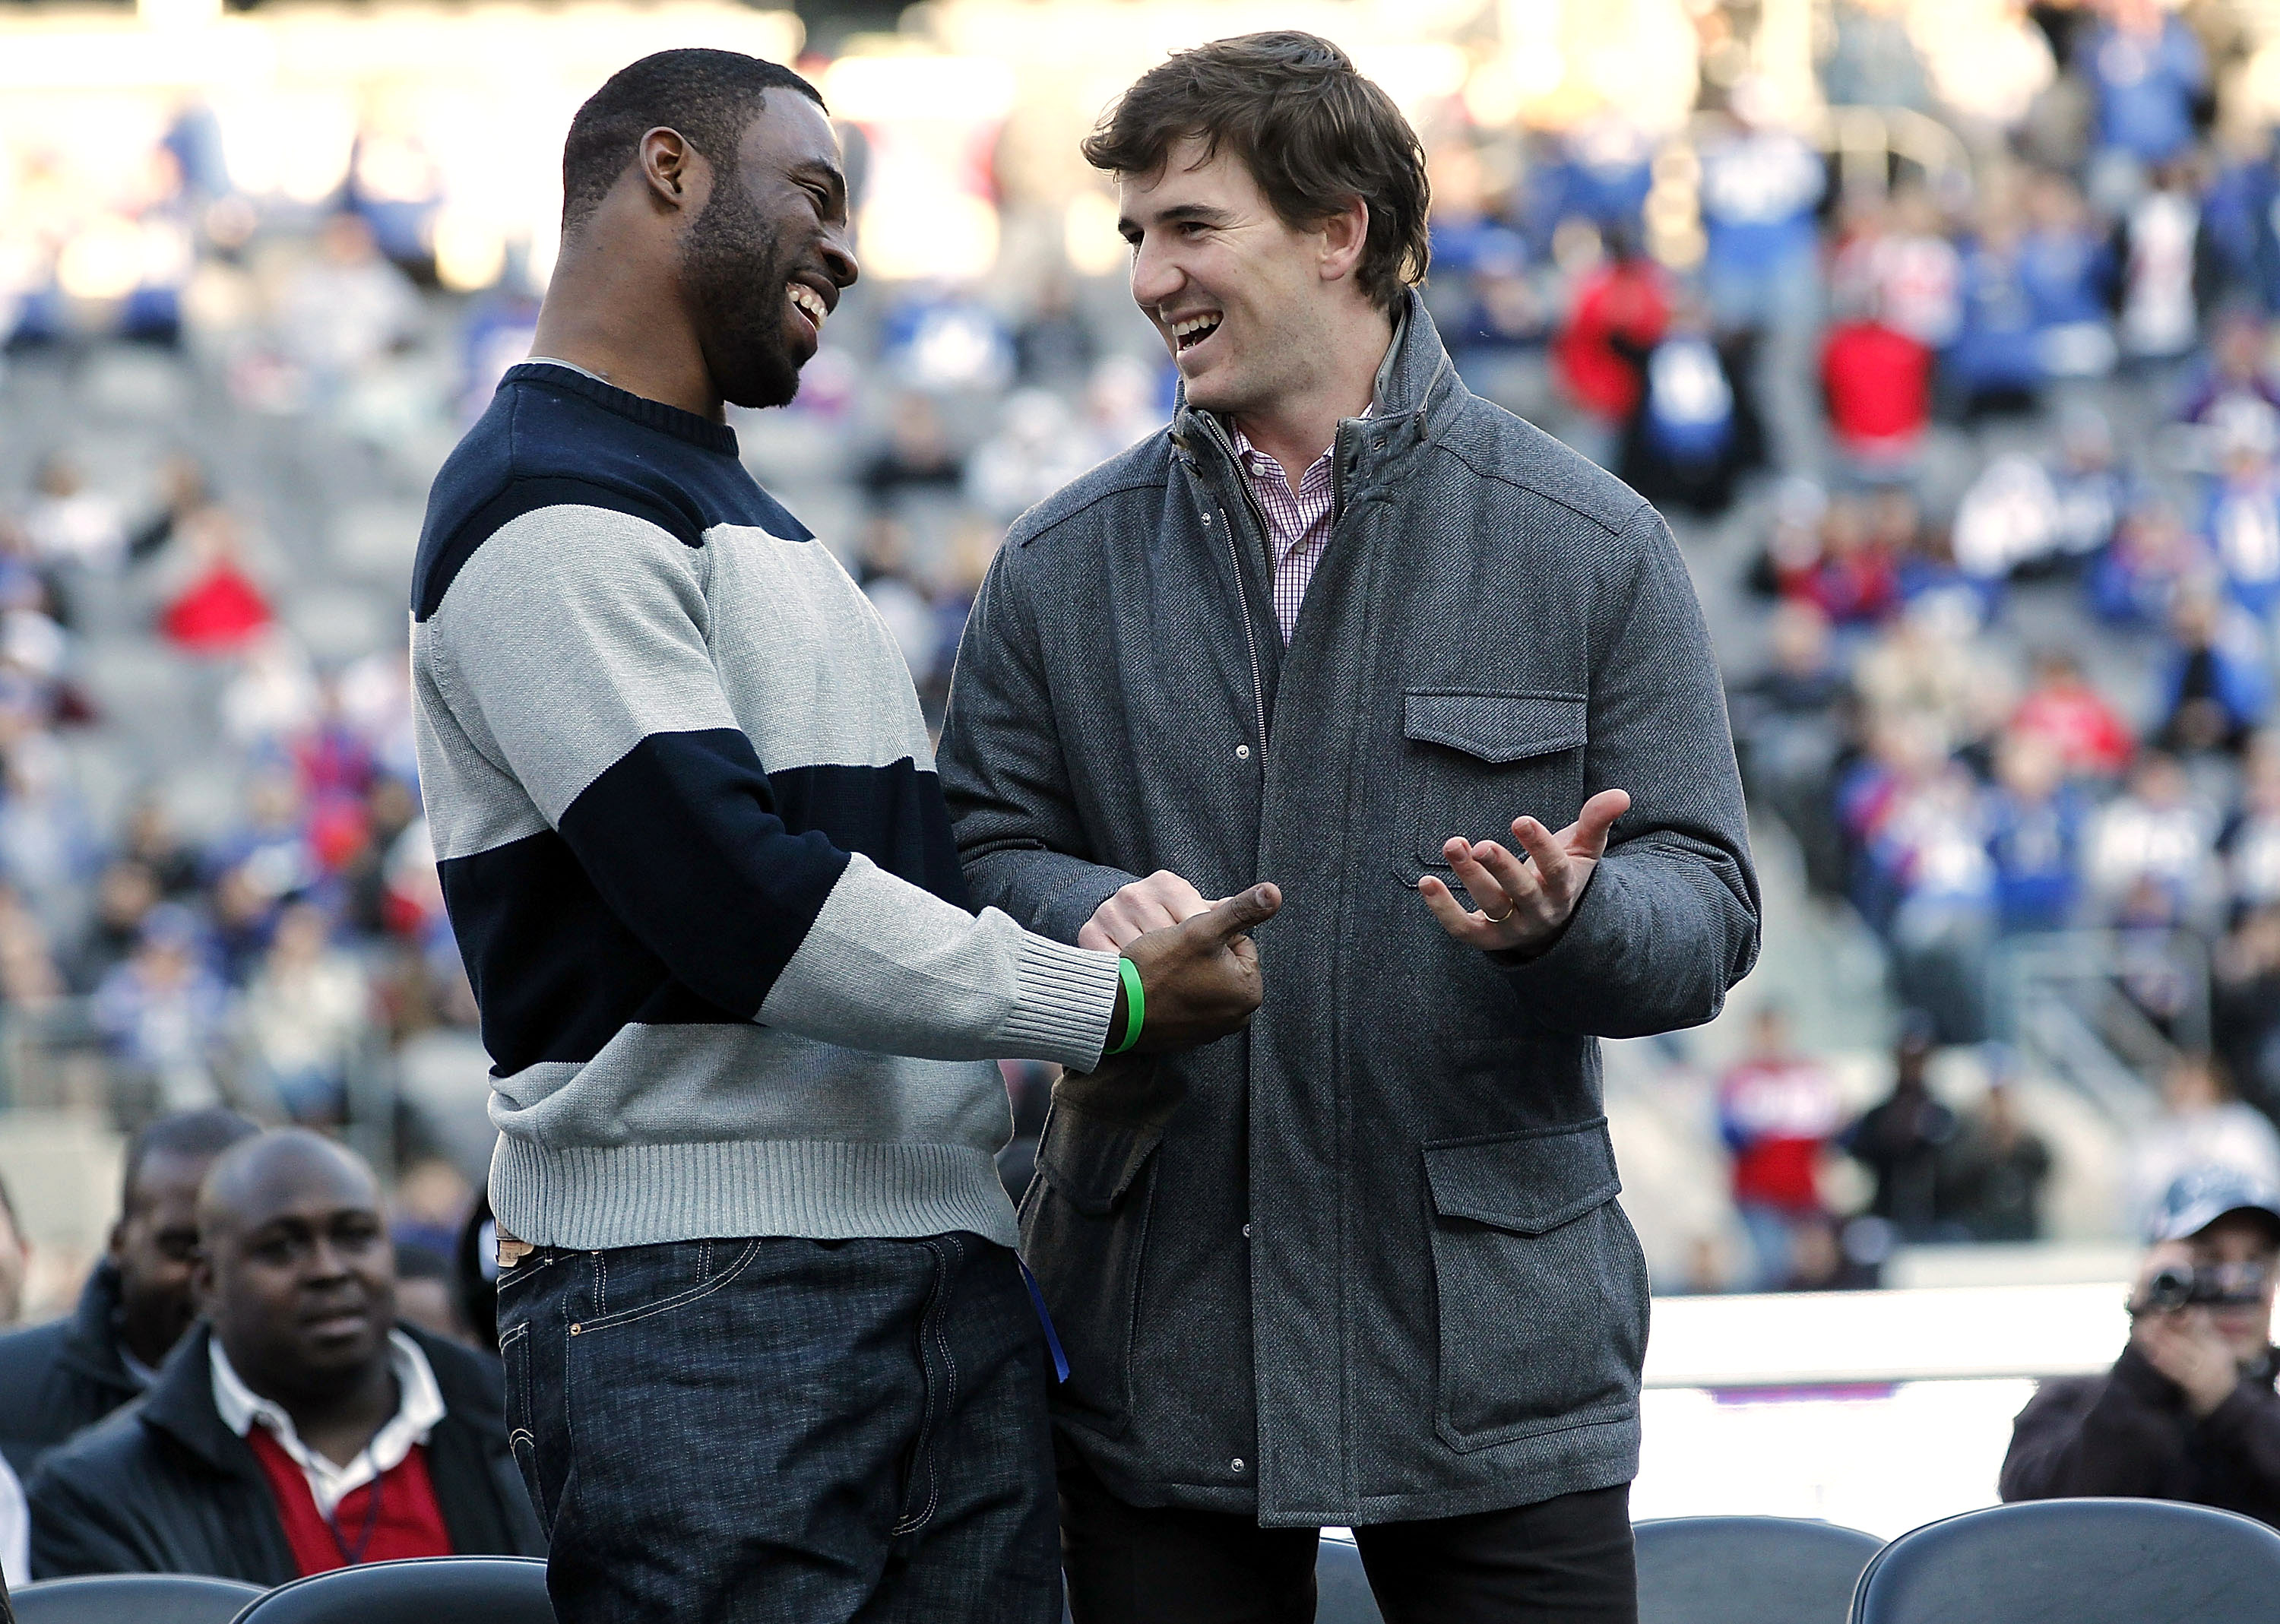 Justin Tuck (L) laughs with teammate Eli Manning at a rally to celebrate the New York Giants' event